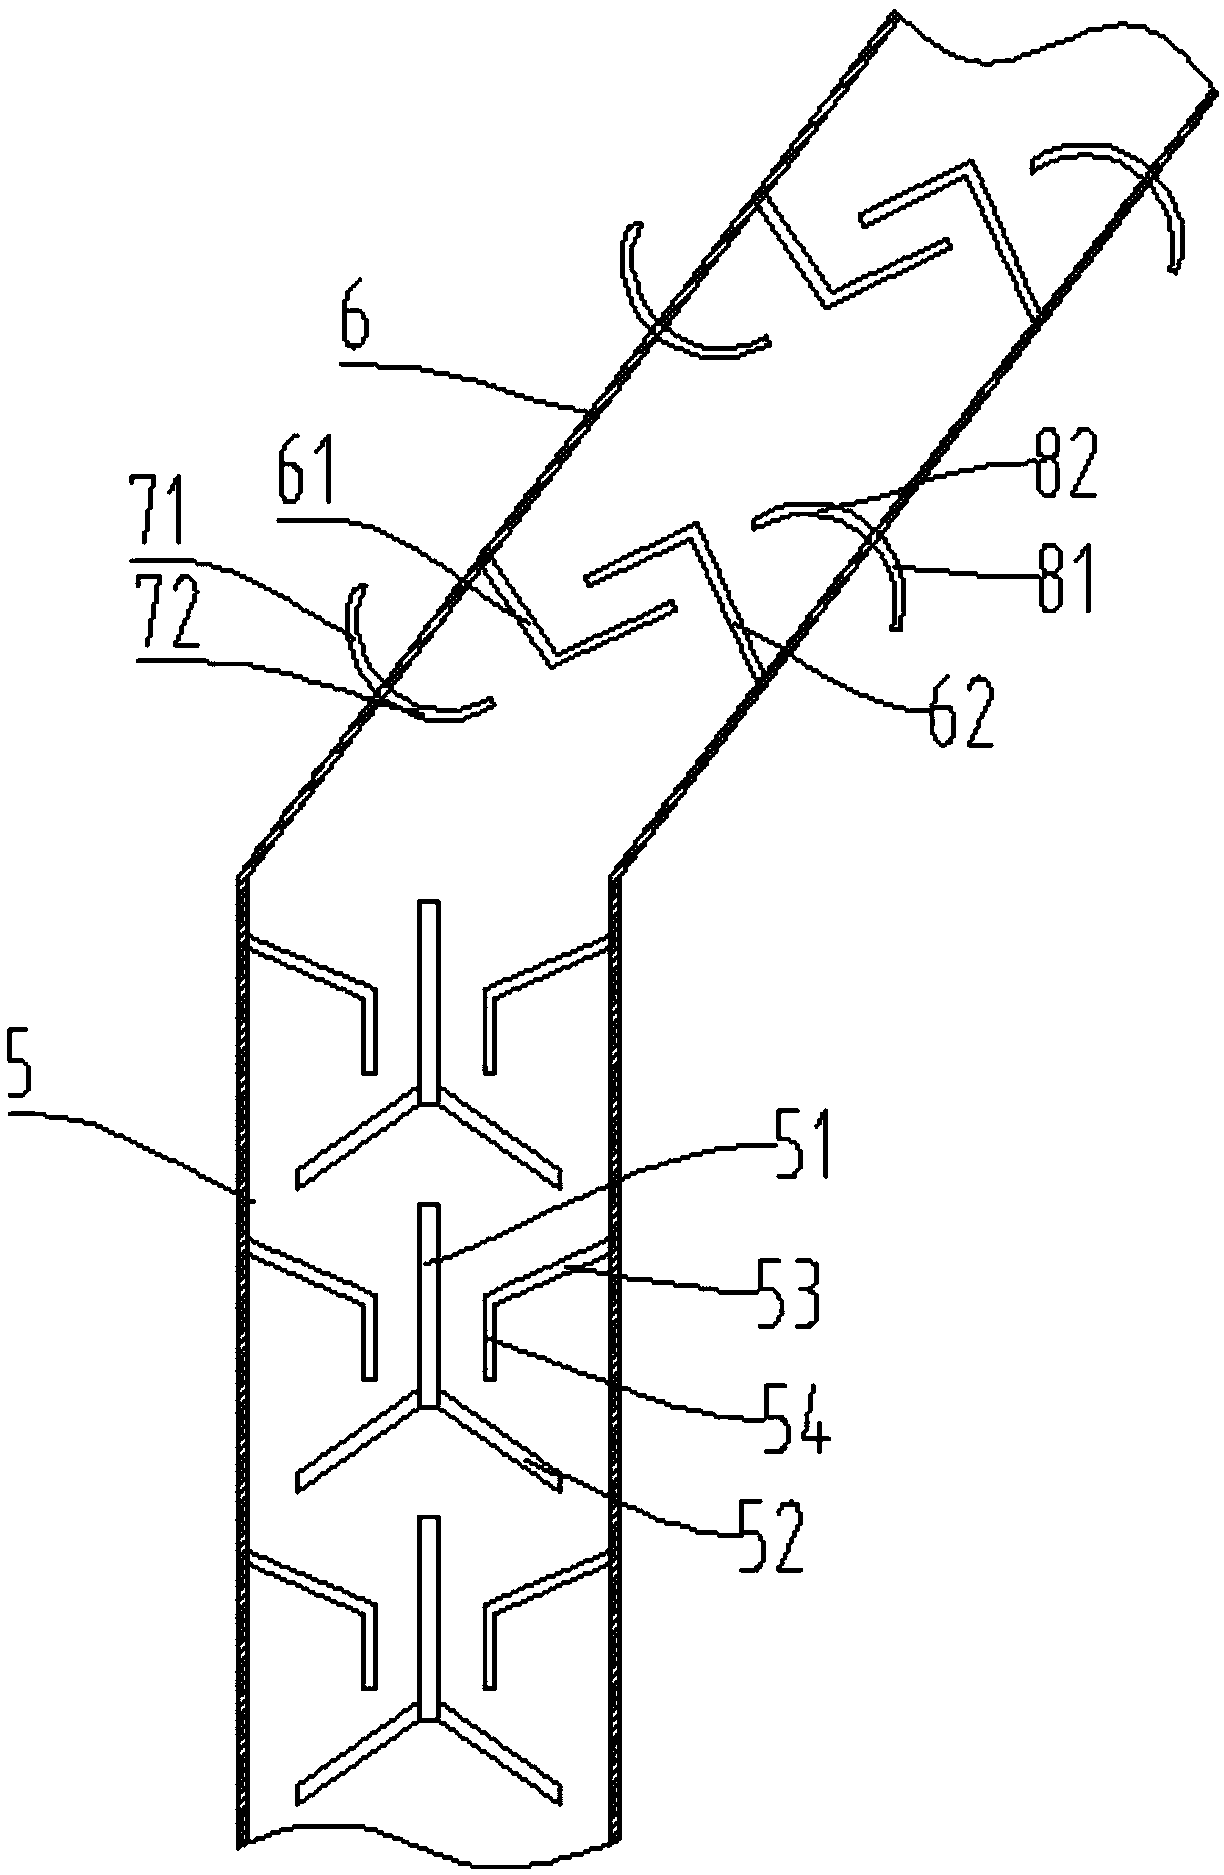 Method and equipment for coproducing chondroitin sulfate, II-type collagen oligopeptide and II-type collagen polypeptide through liquefying animal cartilages